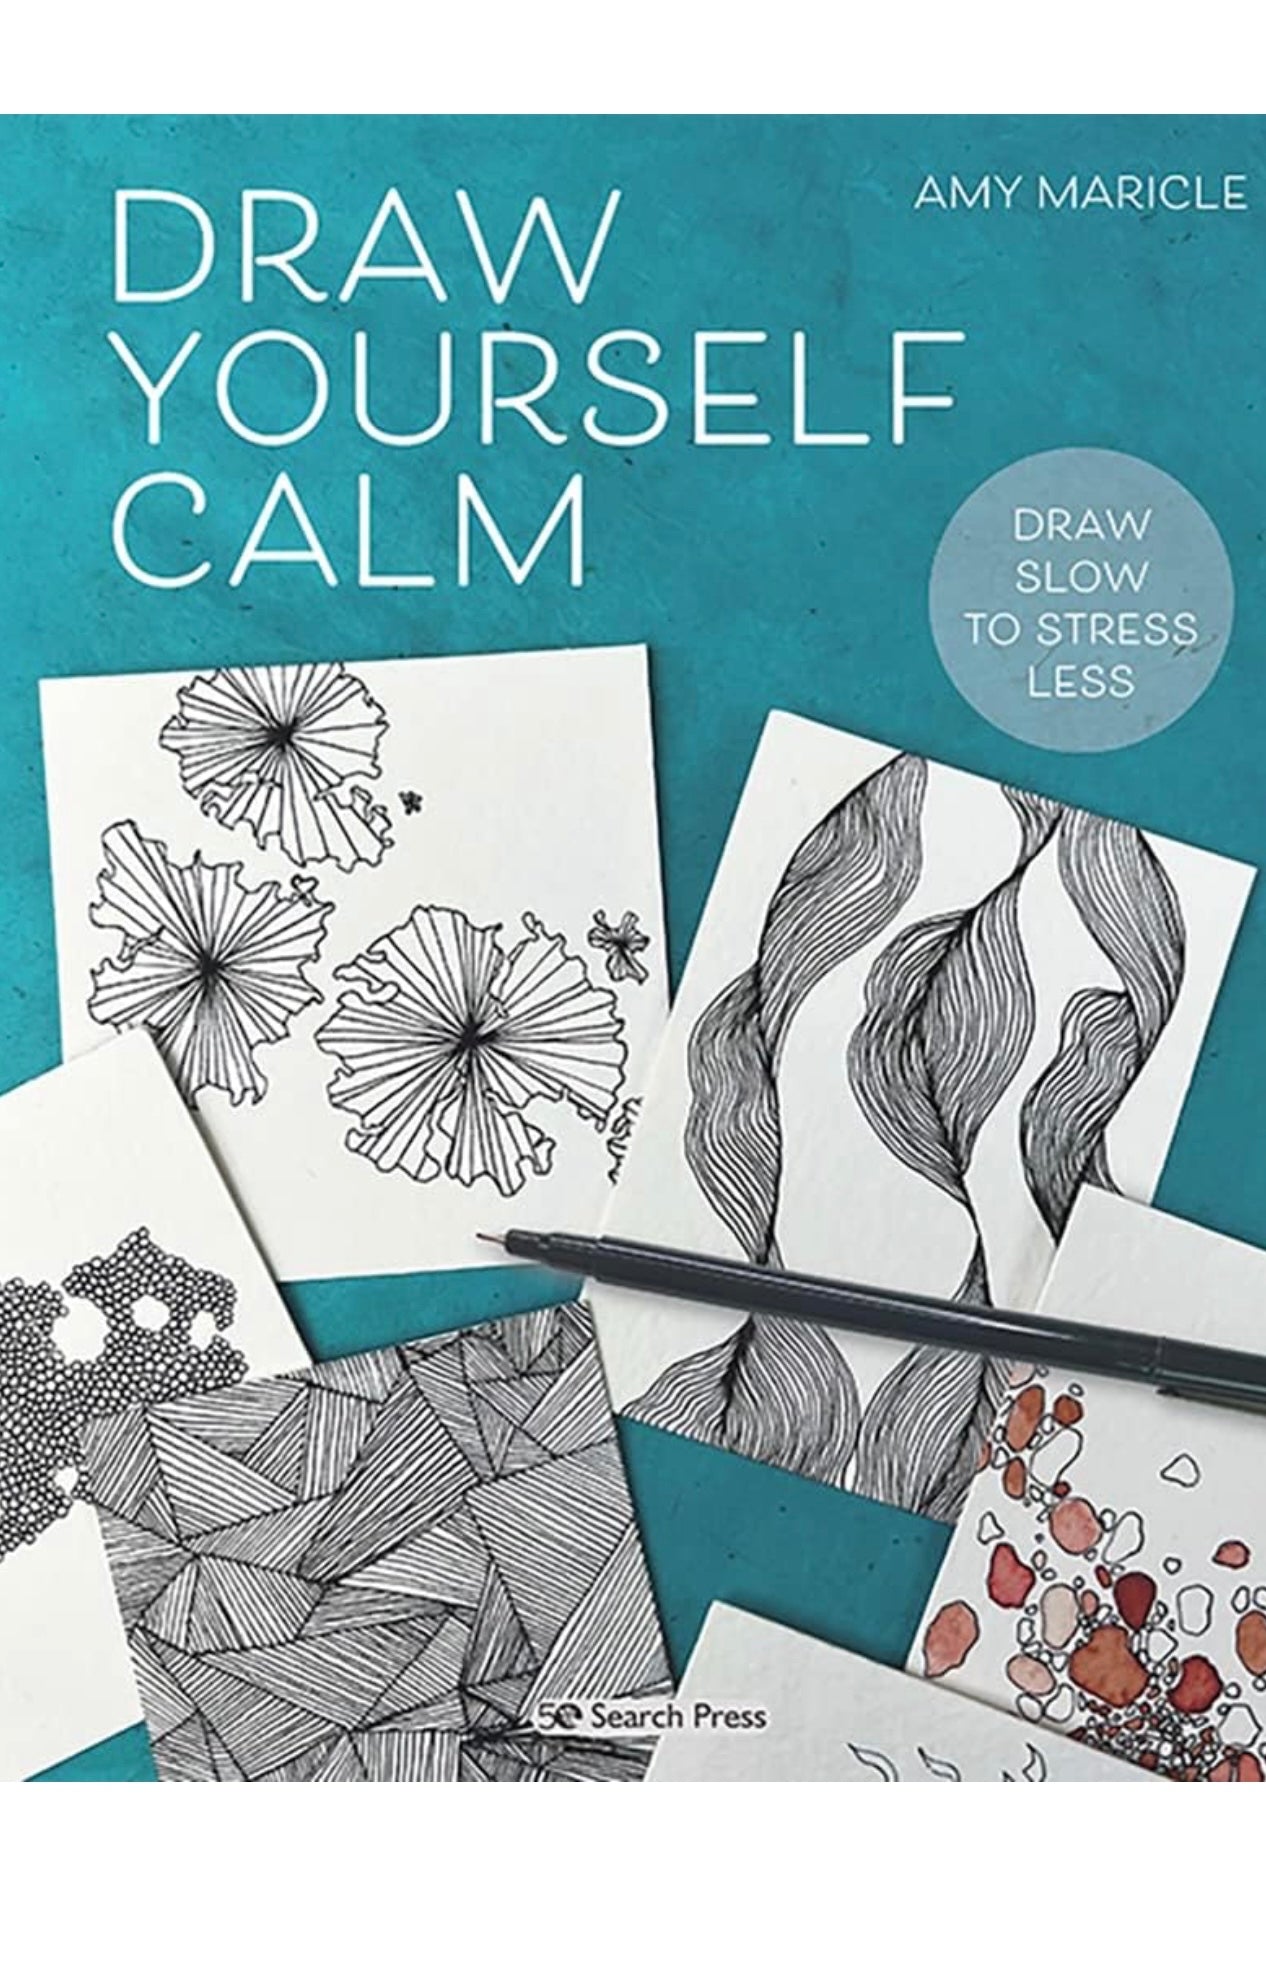 Book - Draw Yourself Calm